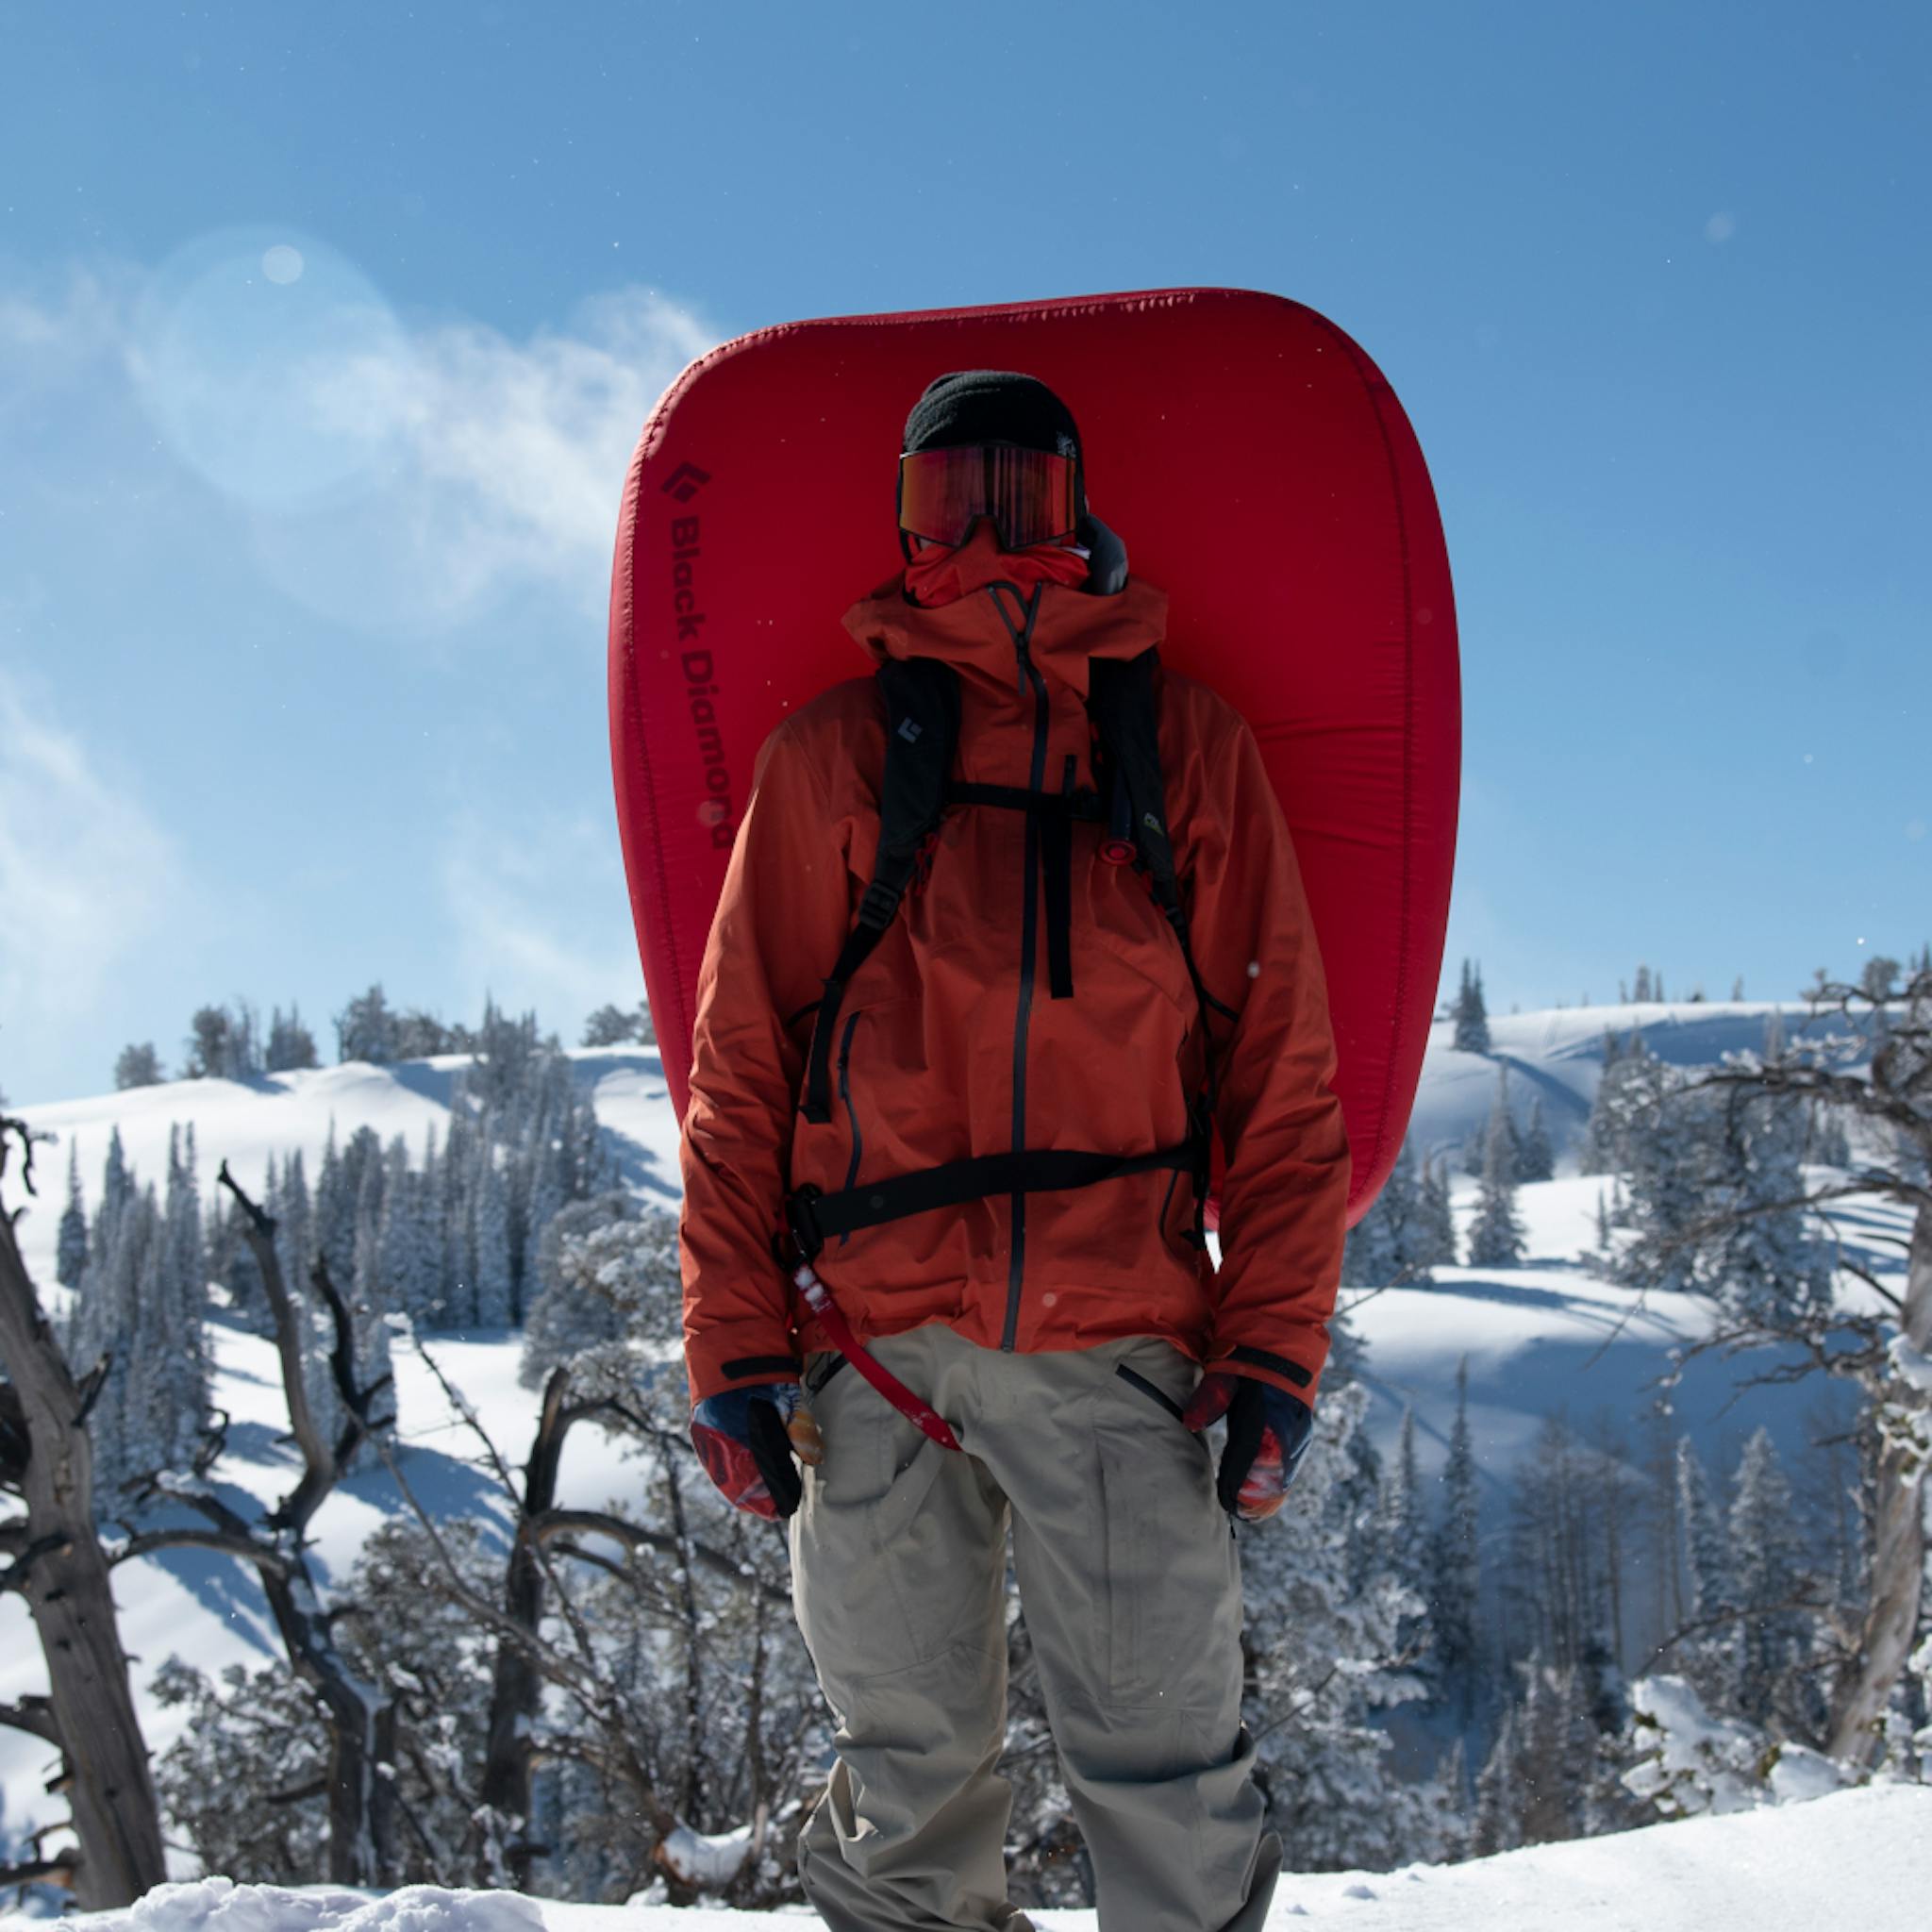 A snowboarder stands with a deployed Jetforce split pack.